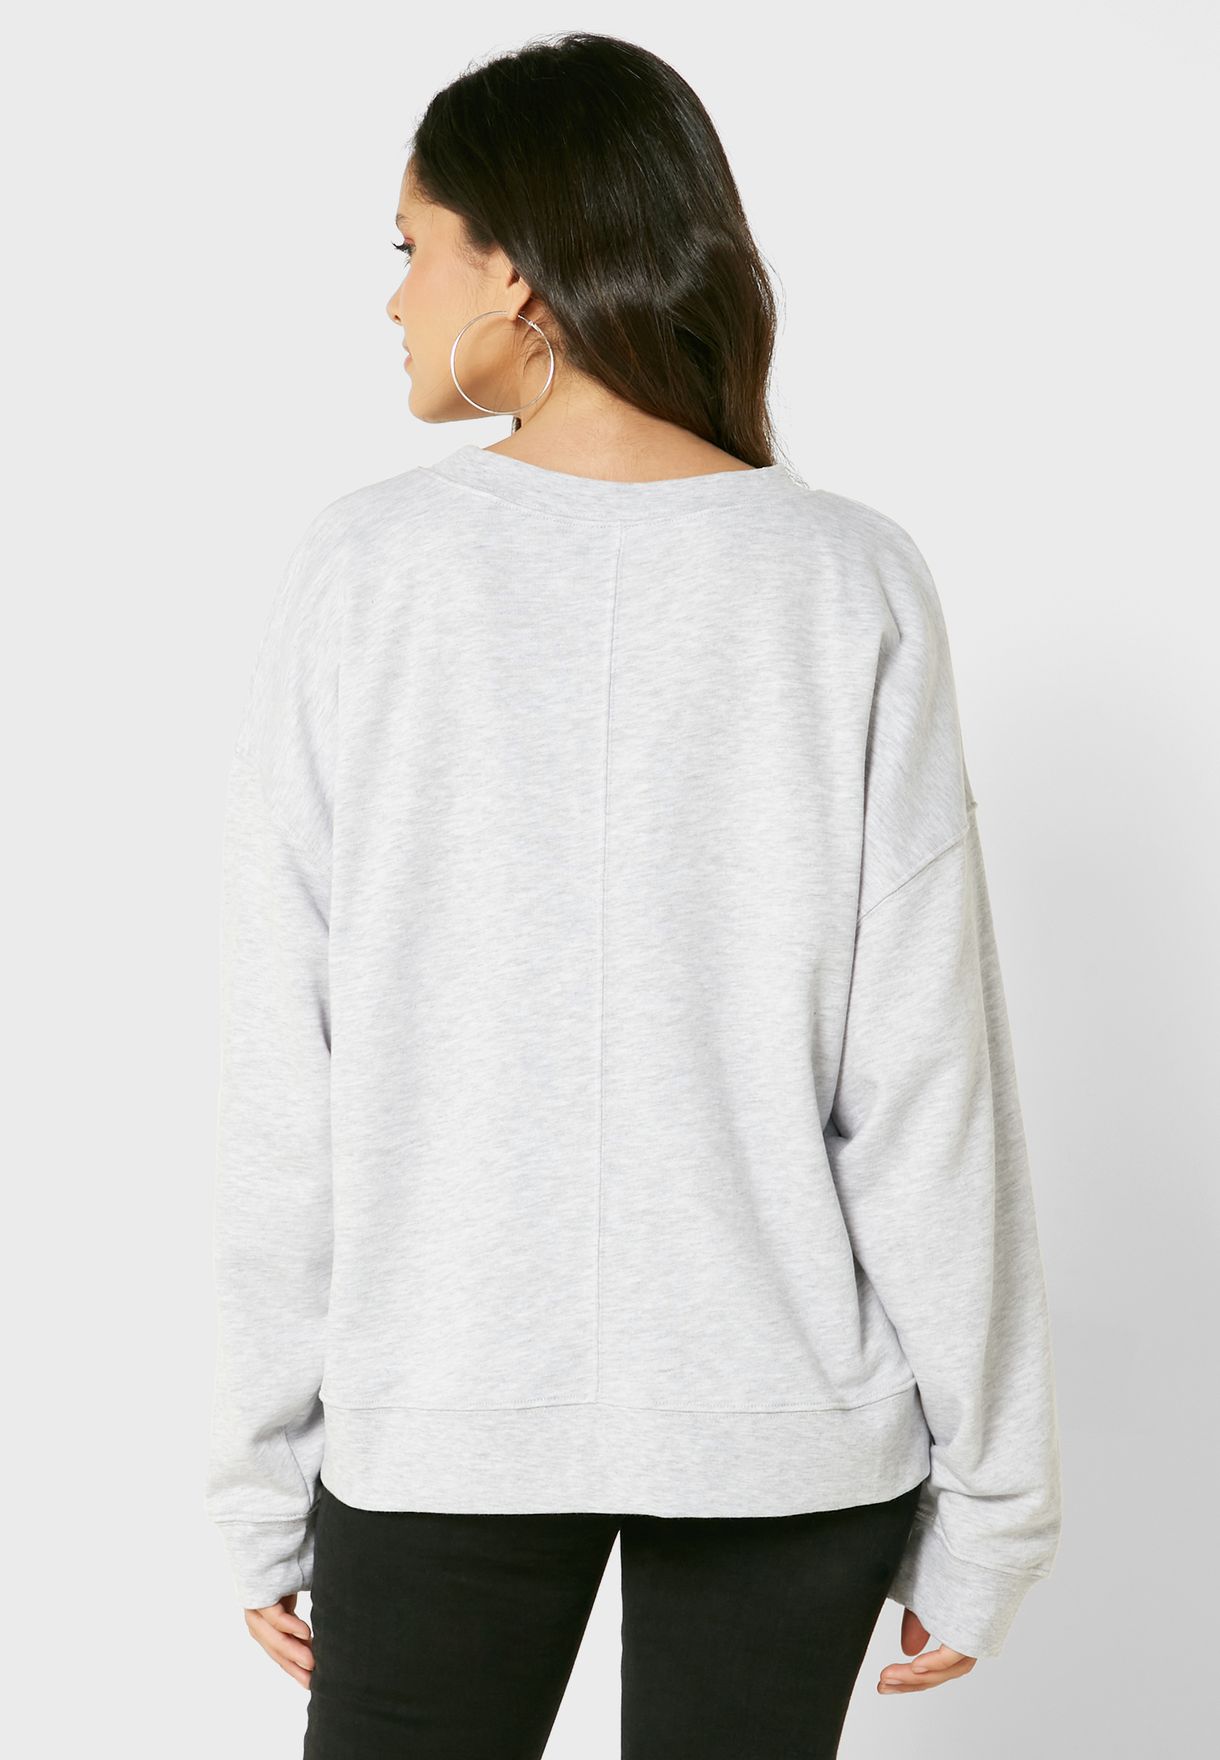 Embroidered Knitted Sweatshirt